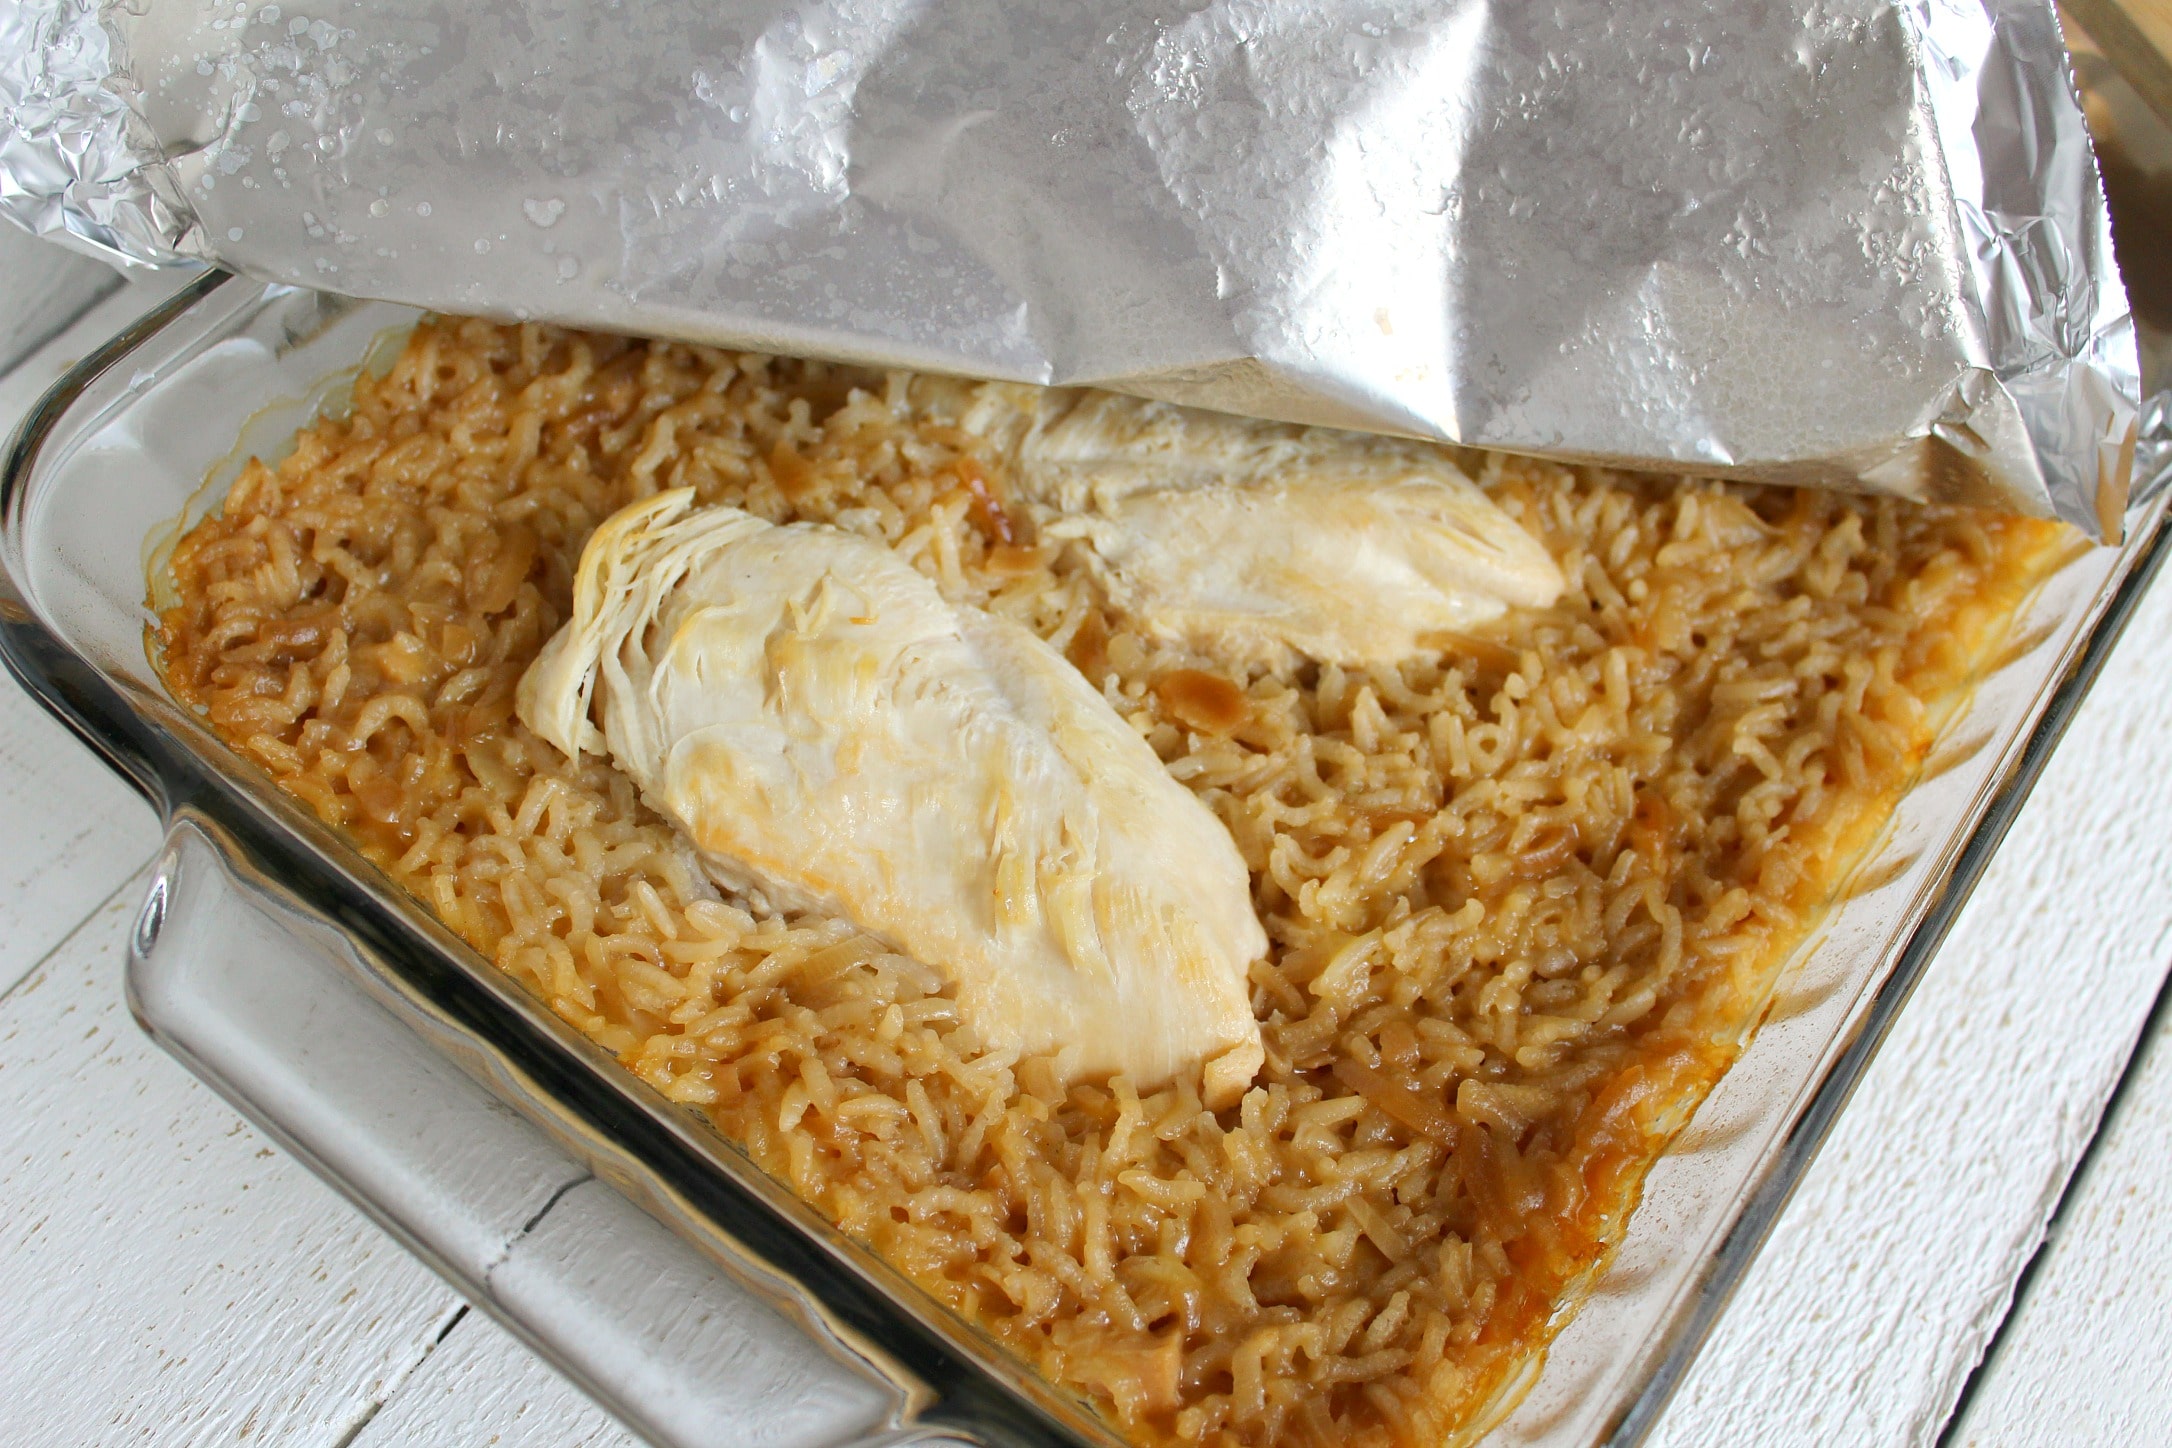 Cover the chicken and rice casserole with foil and bake. 